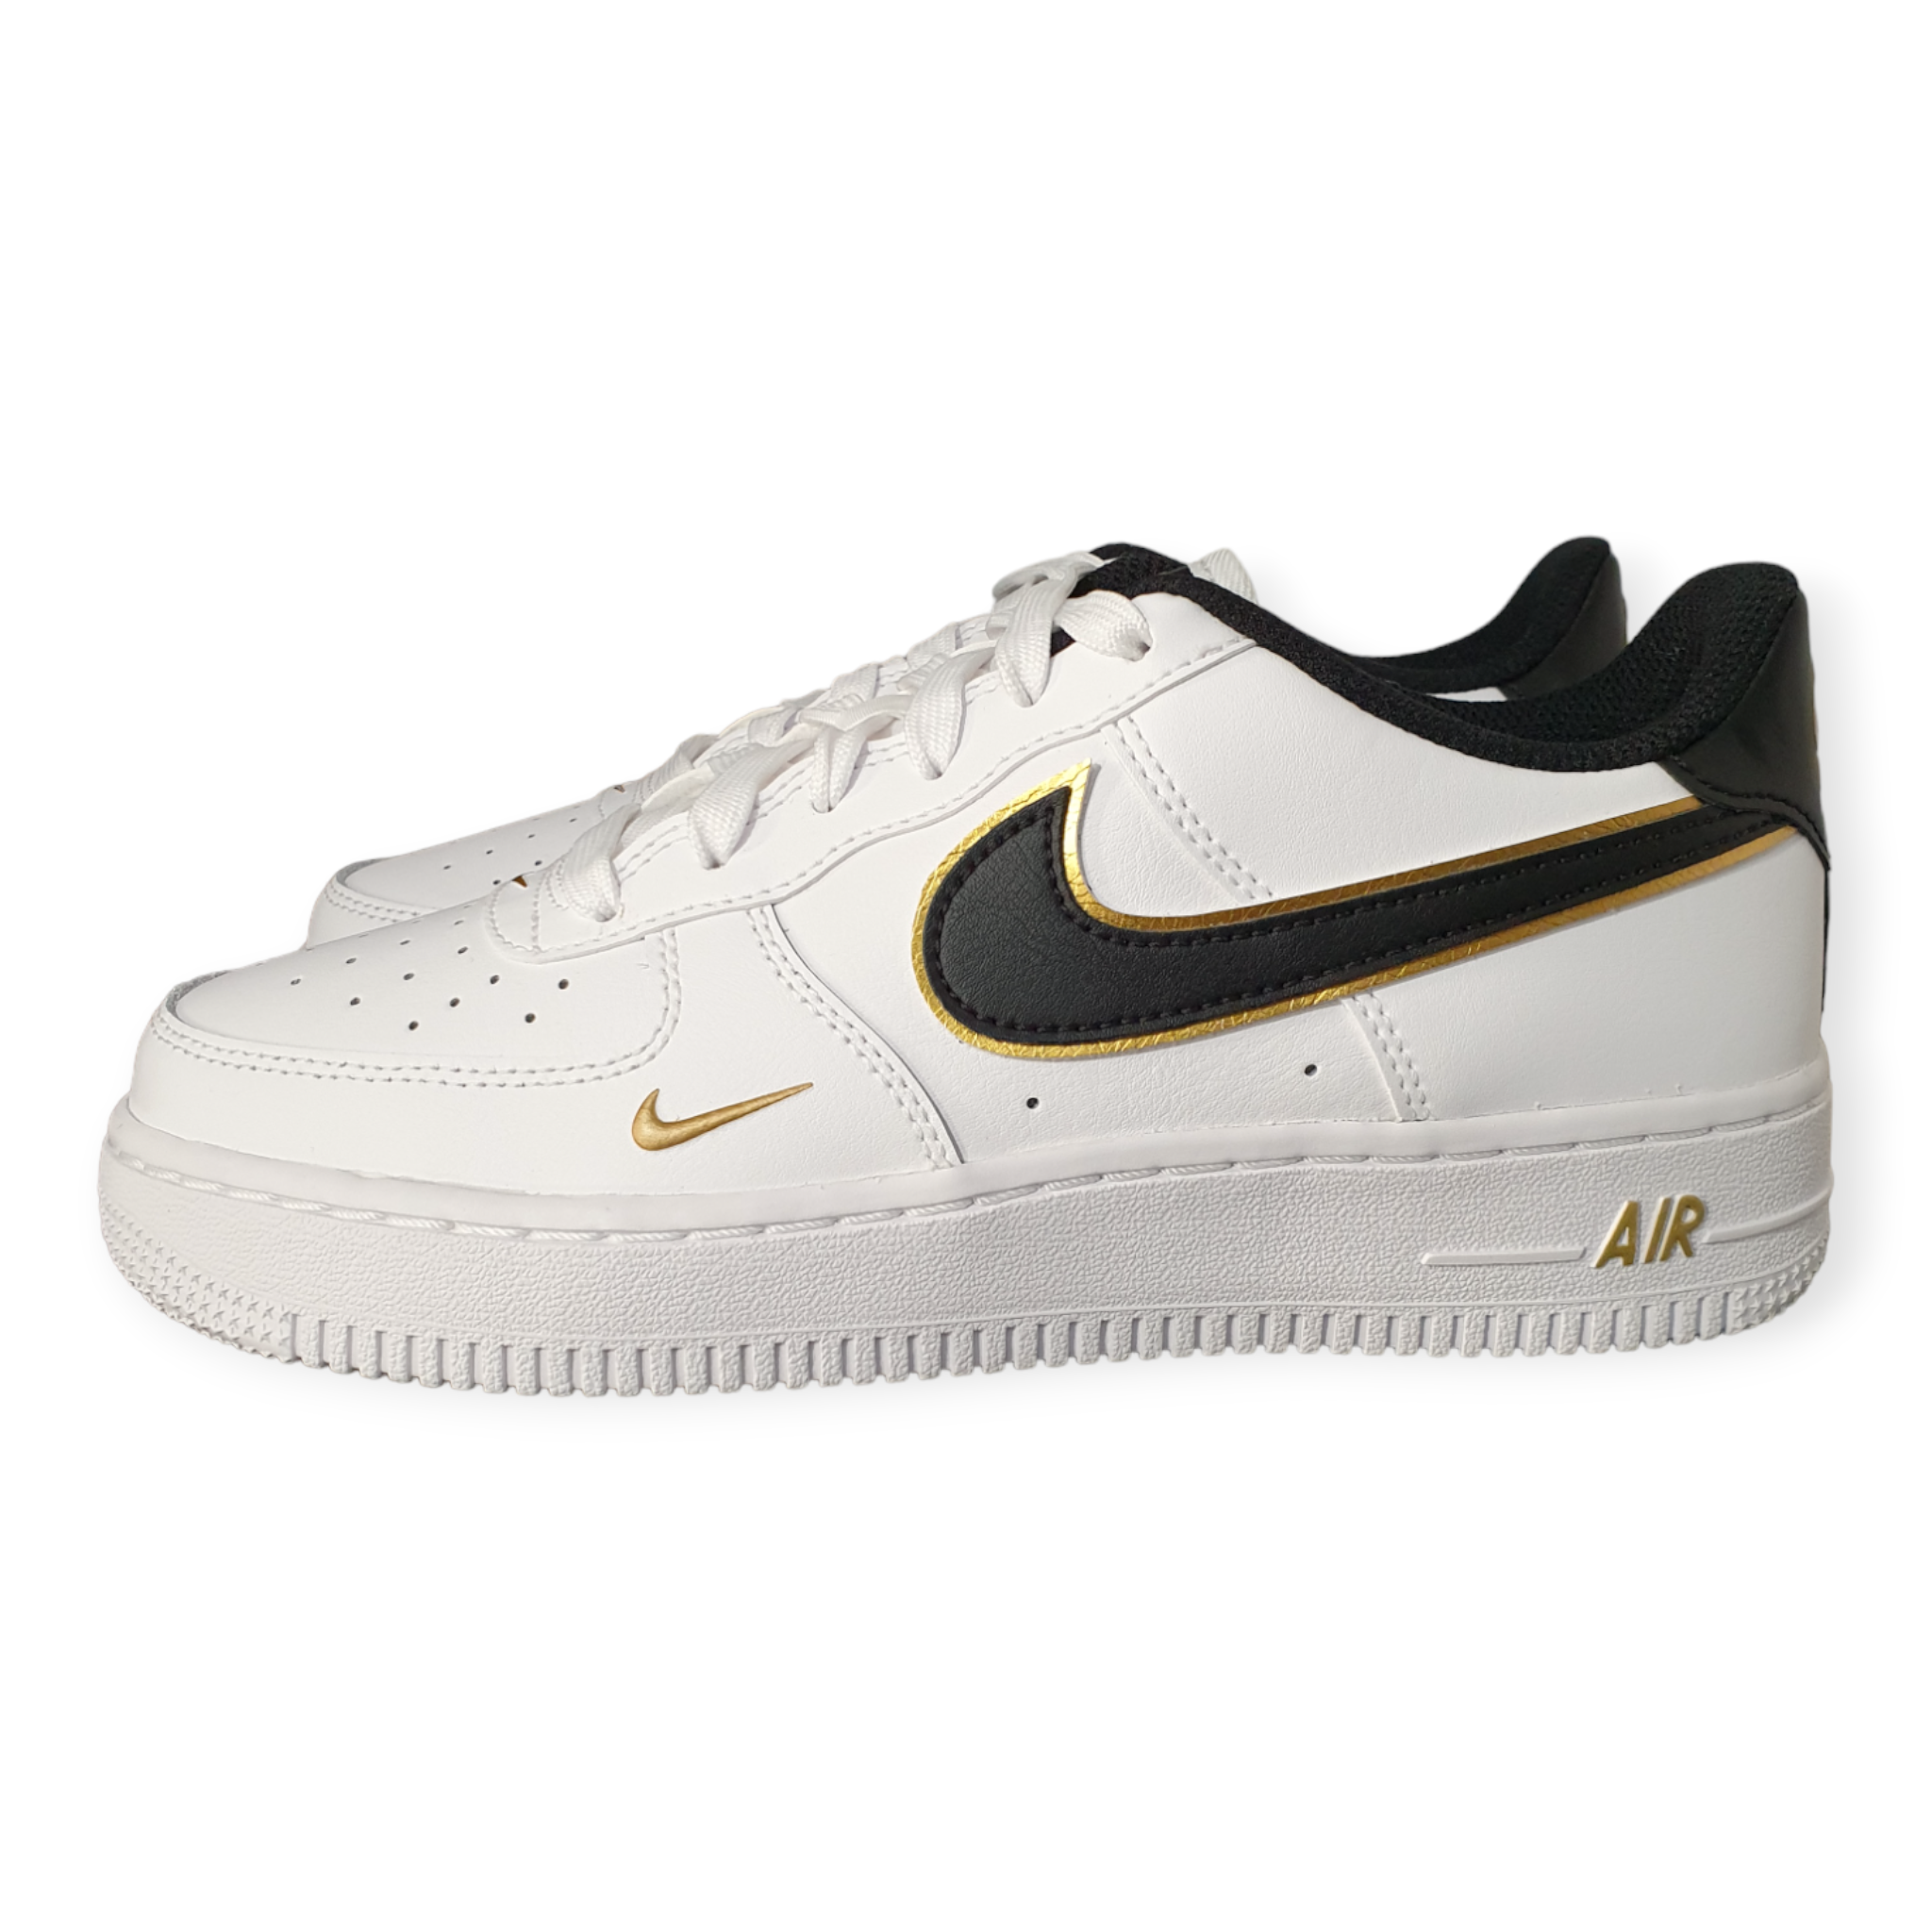 Nike Air Force 1 Low '07 LV8 Double Swoosh White Metallic Gold (GS